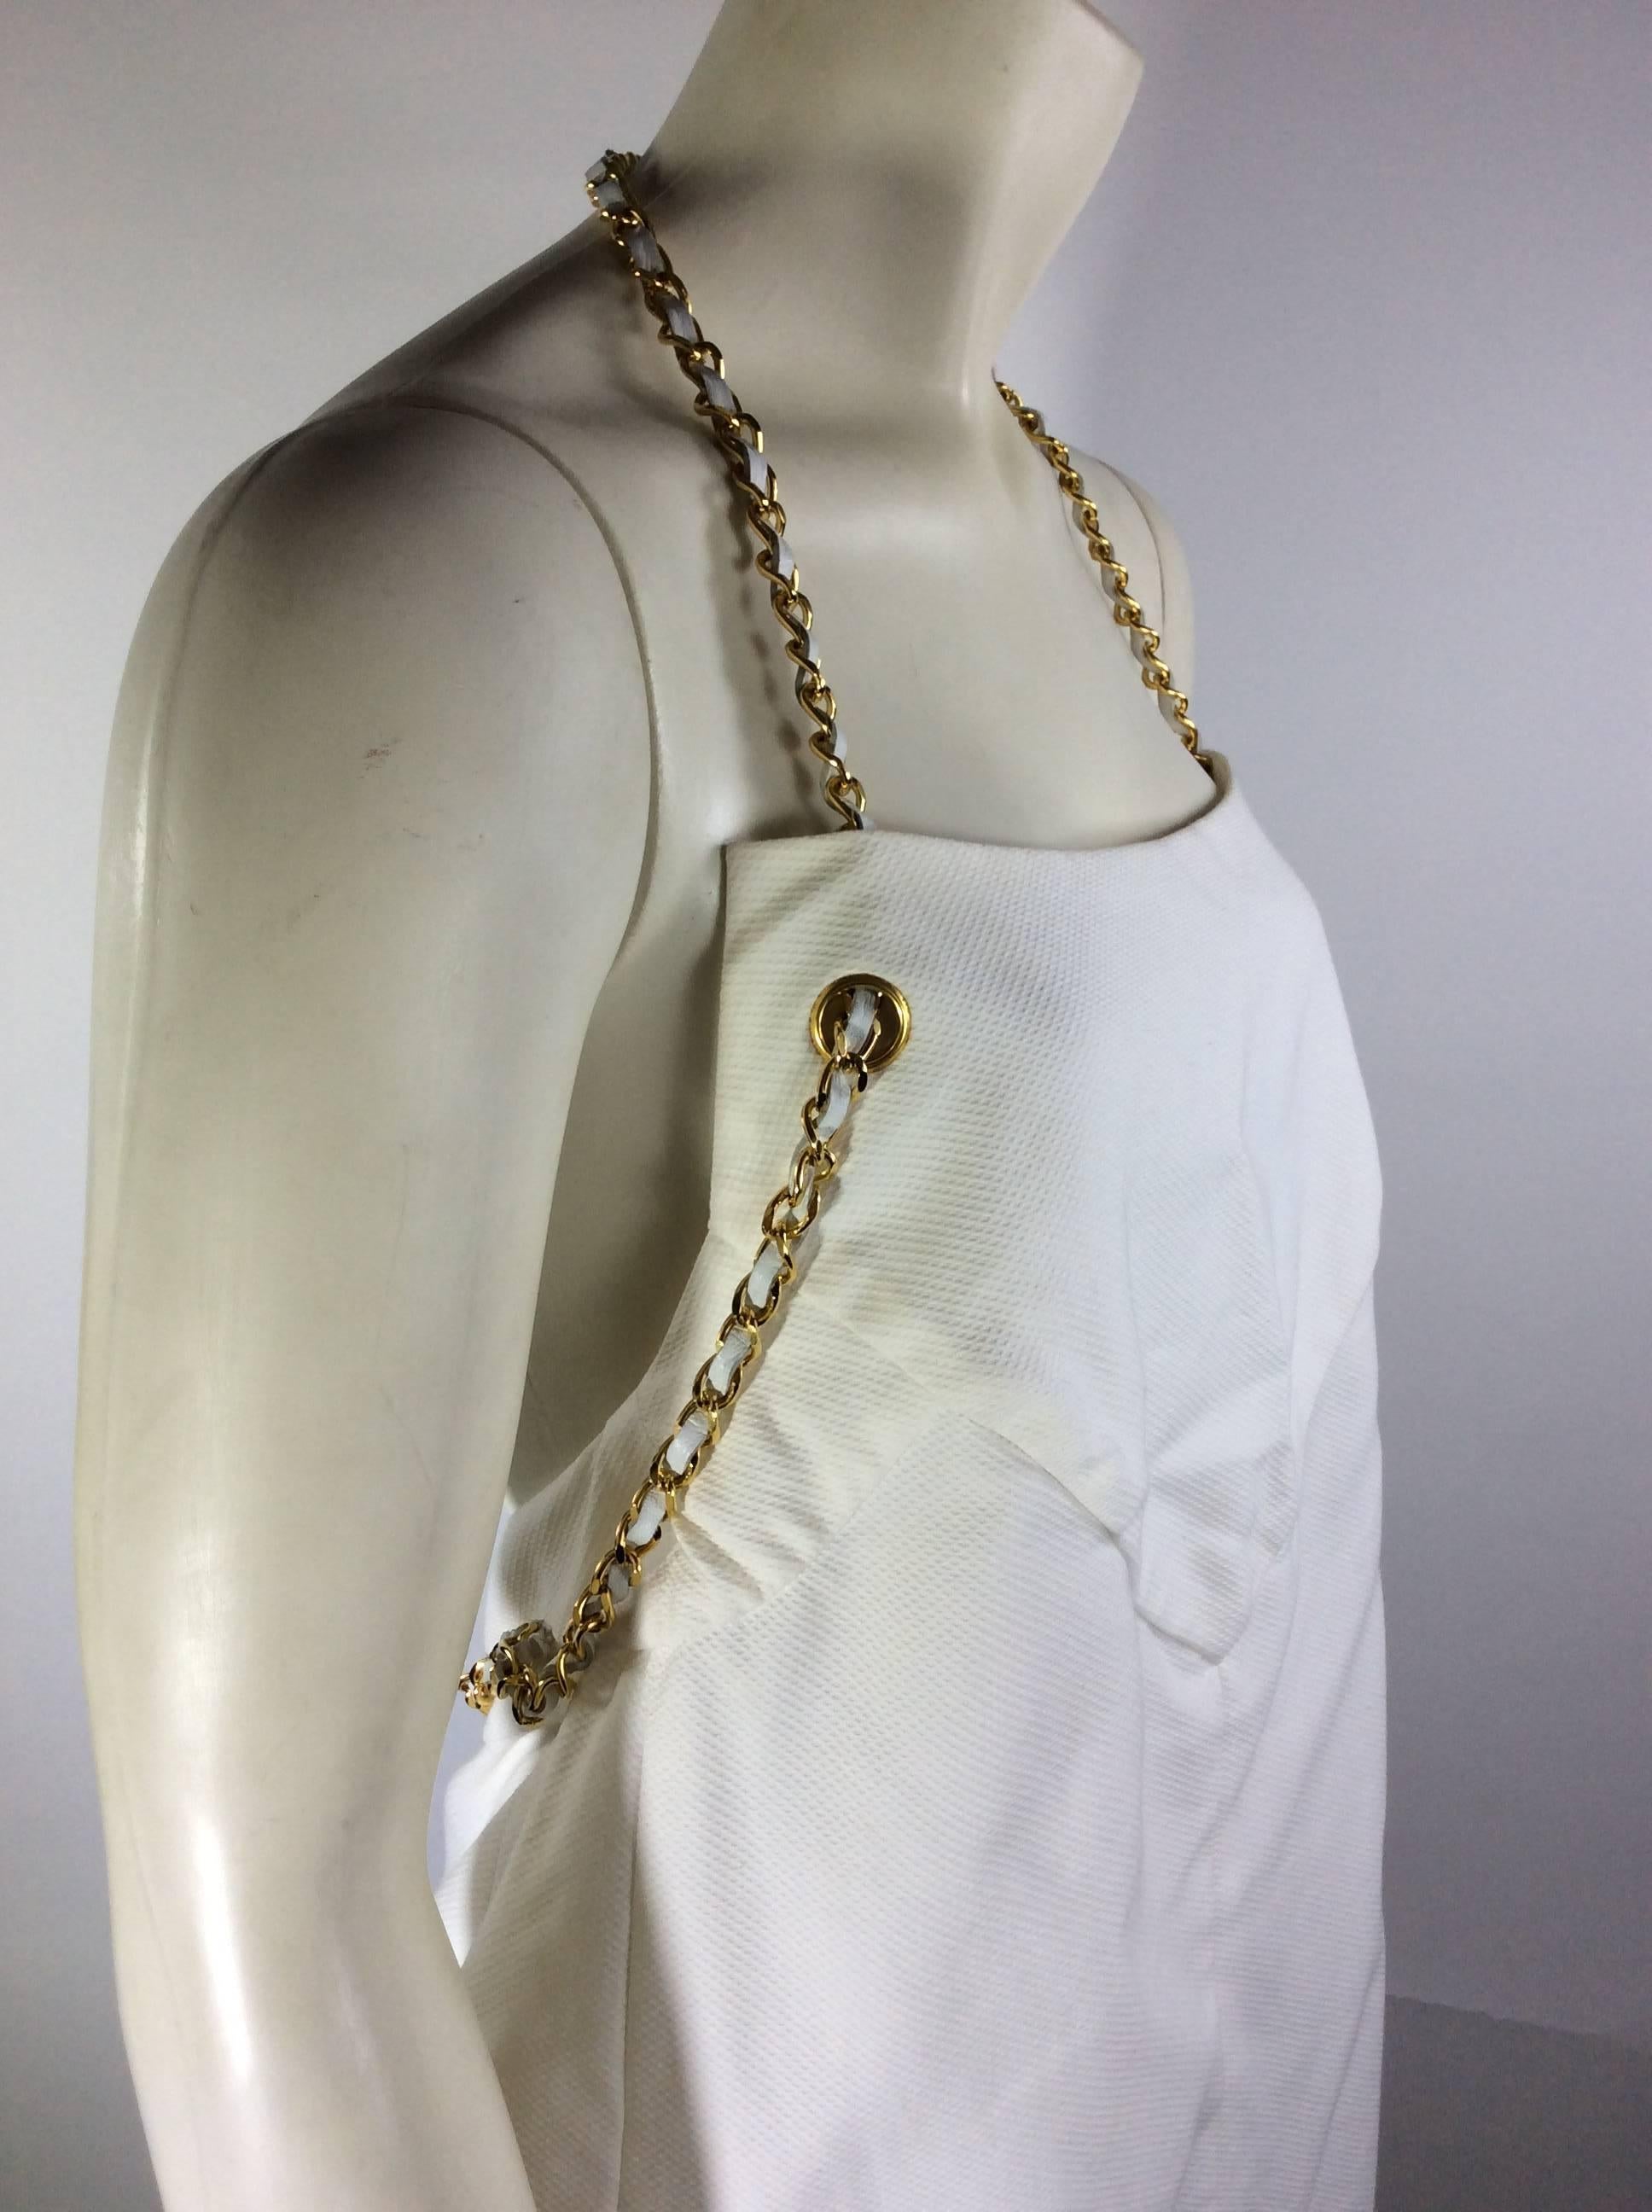 Chanel White with Gold Chain Top In Good Condition For Sale In Narberth, PA